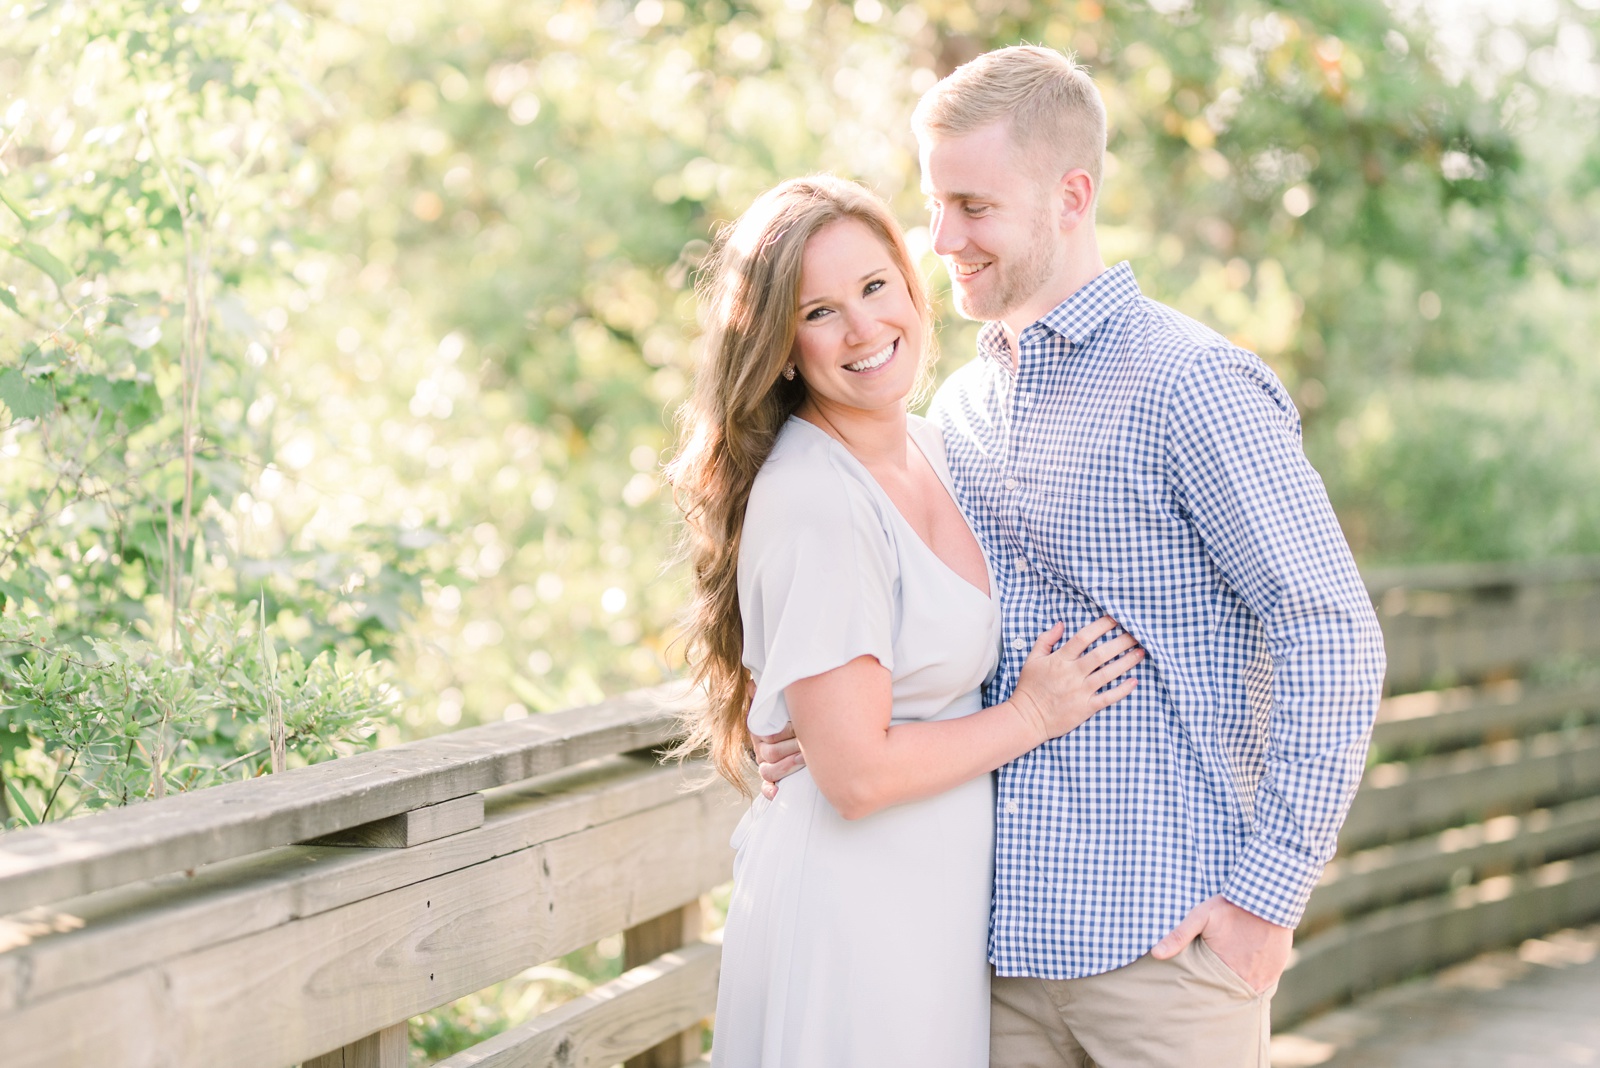 outer-banks-obx-kitty-hawk-engagement-photos_4603.jpg